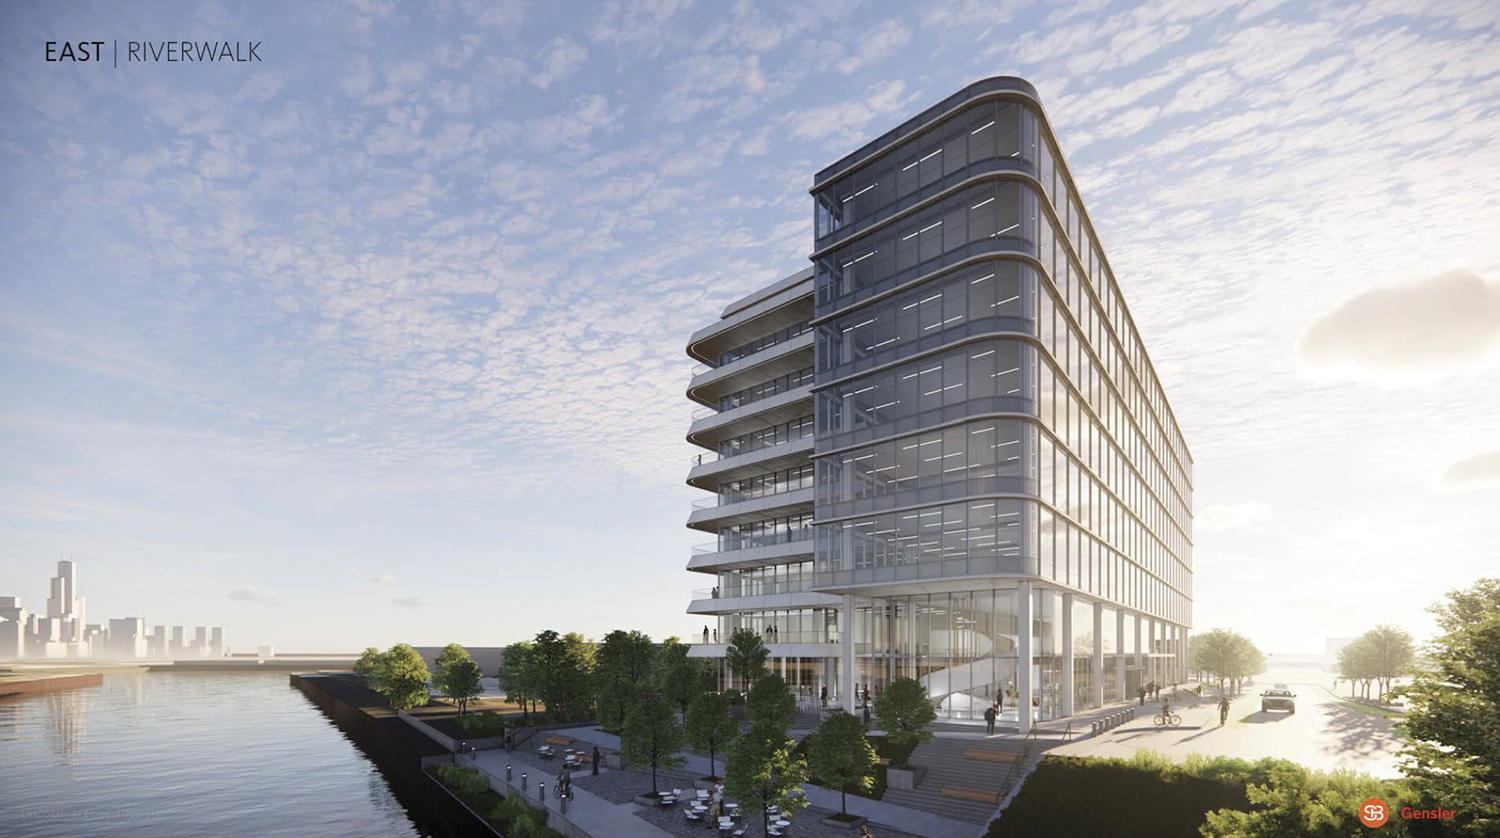 Life Sciences Building at Lincoln Yards. Rendering by Gensler